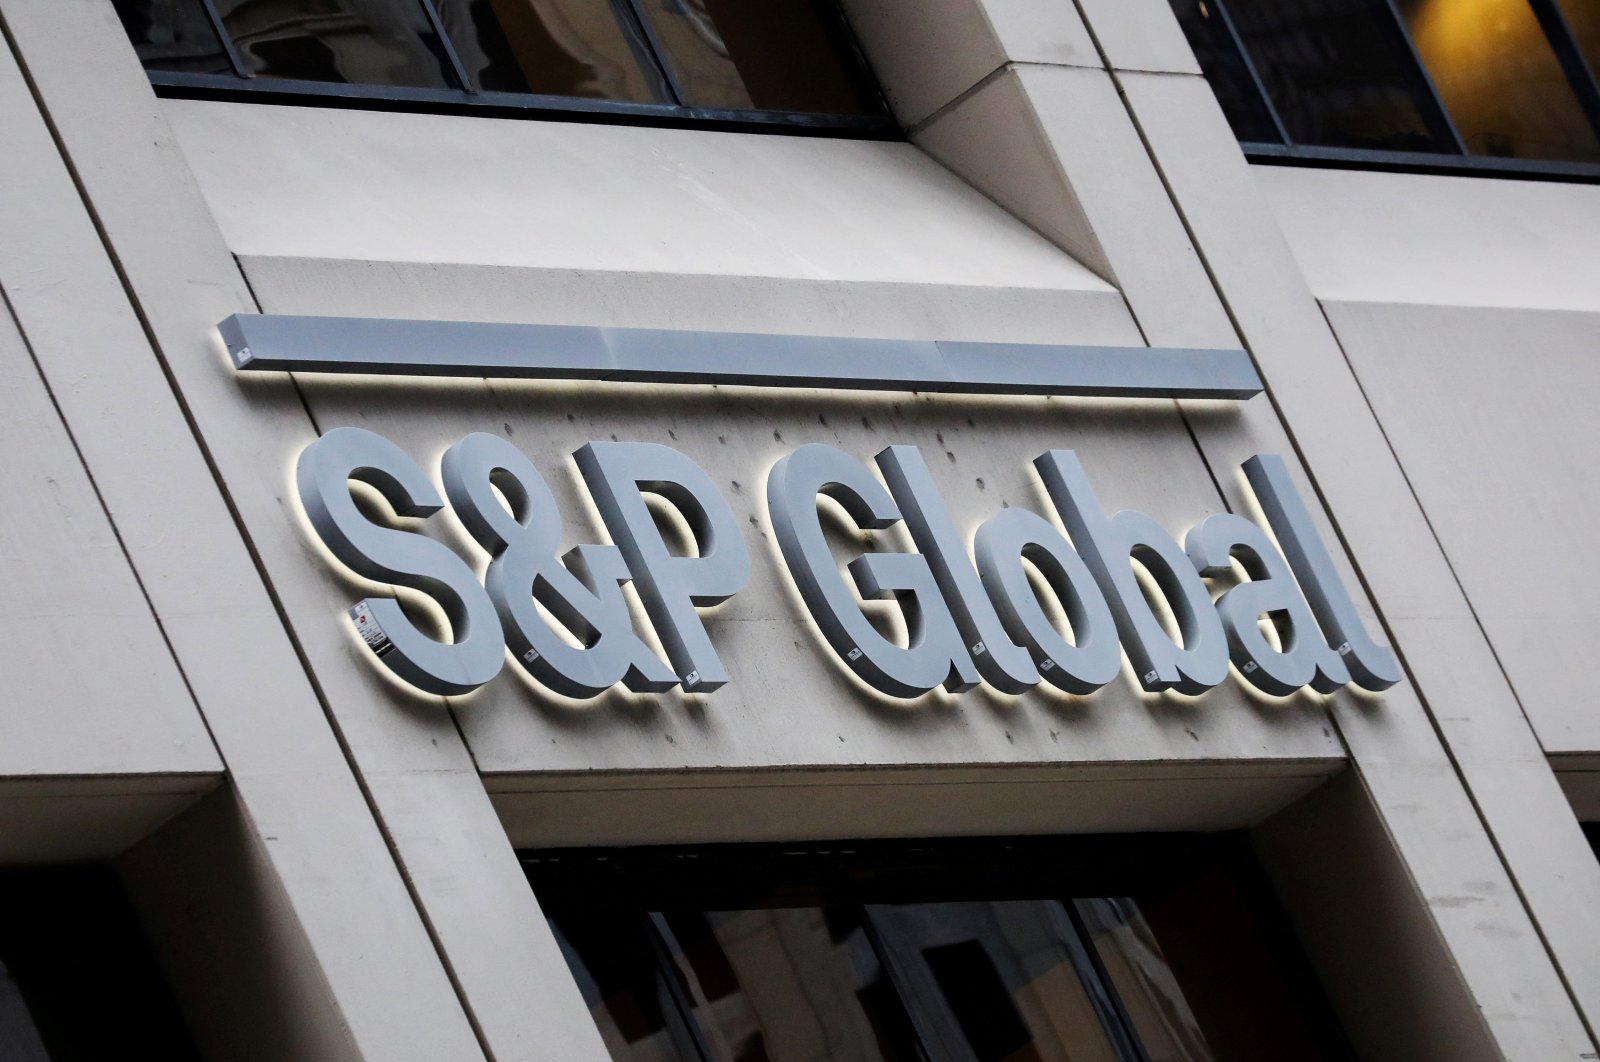 The S&amp;P Global logo is displayed on its offices in the financial district in New York City, U.S., Dec. 13, 2018. (Reuters Photo)